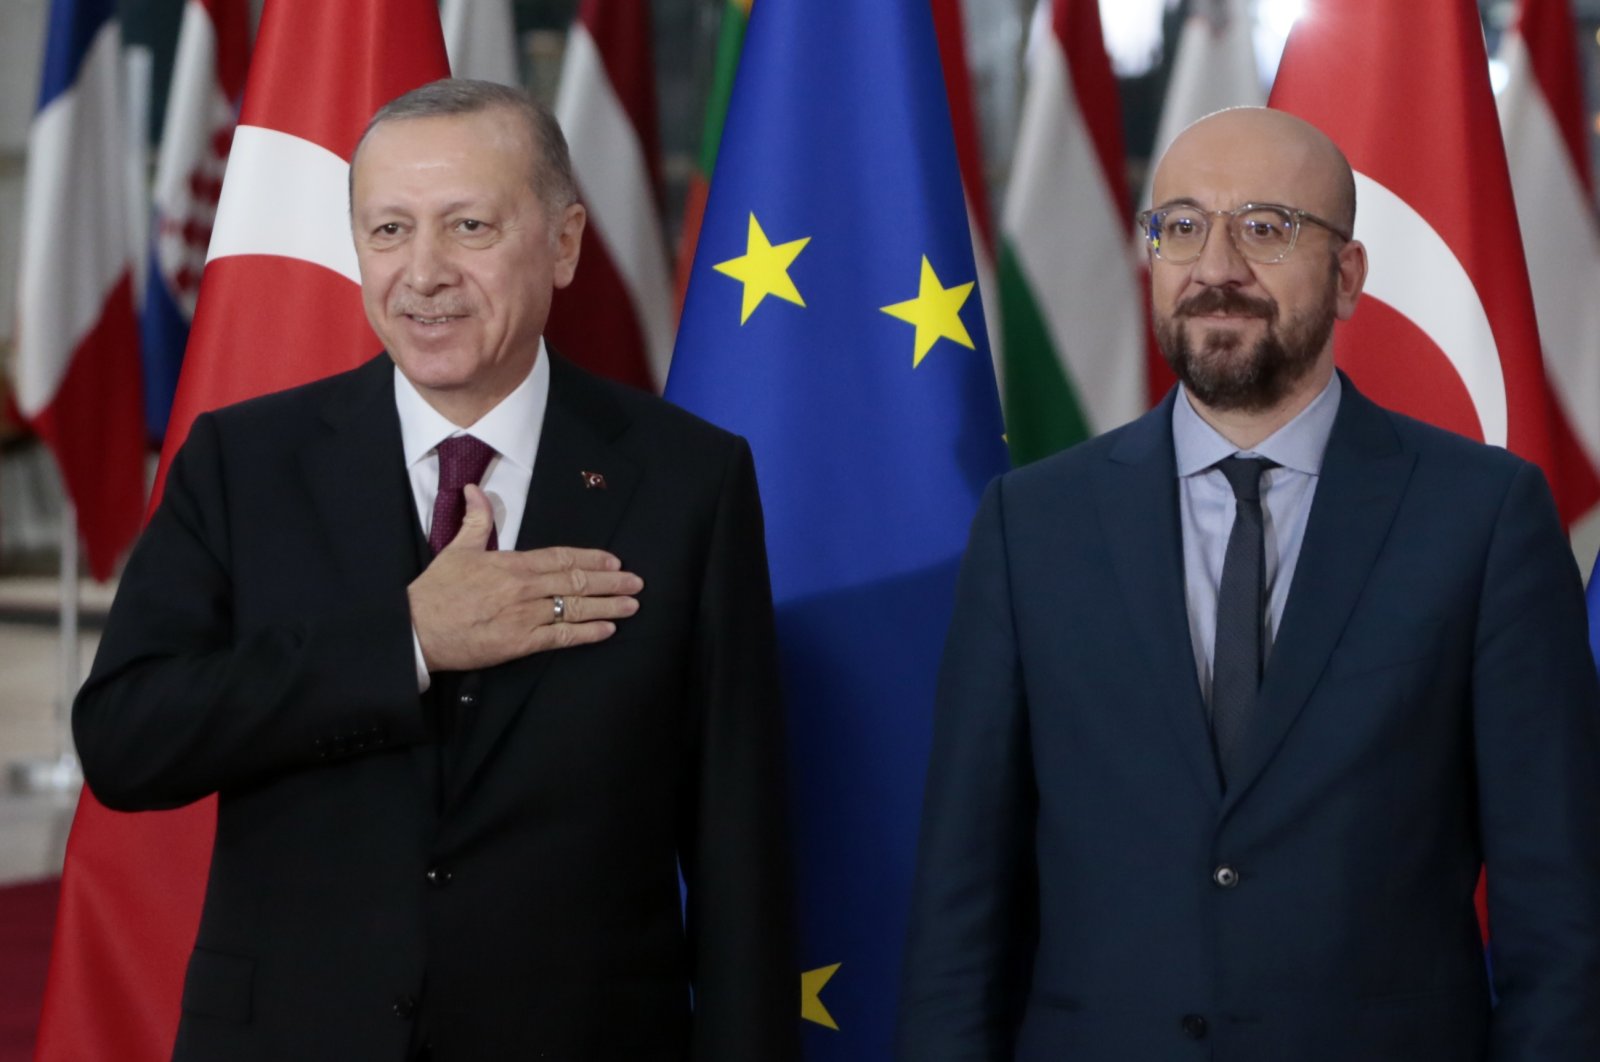 President Recep Tayyip Erdoğan (L) is welcomed by European Council President Charles Michel prior to a meeting, Brussels, Belgium, March 9, 2020. (AP Photo)